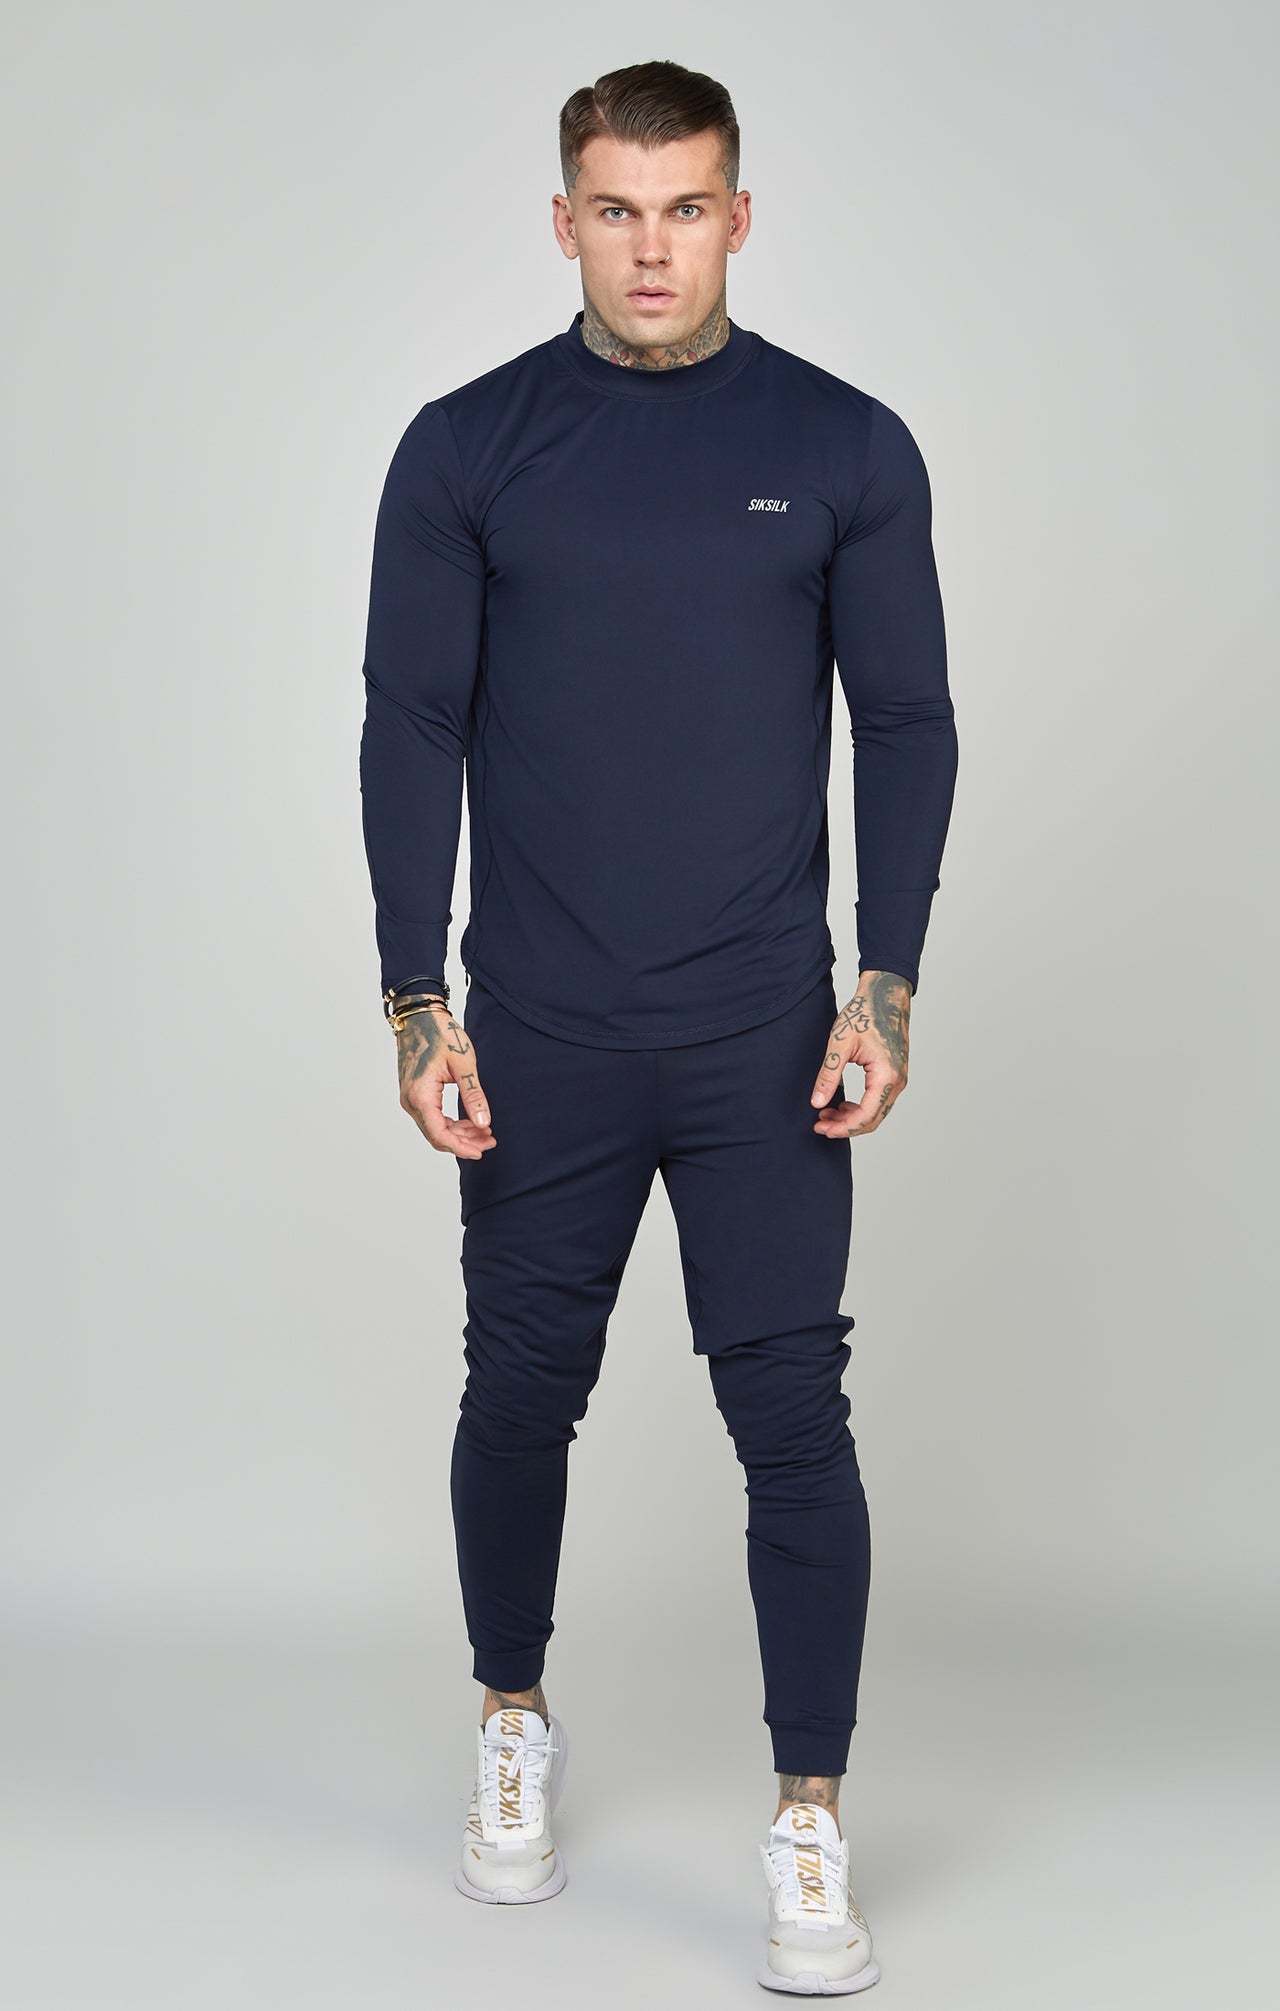 Navy Sports Muscle Fit Long Sleeve Top (1)